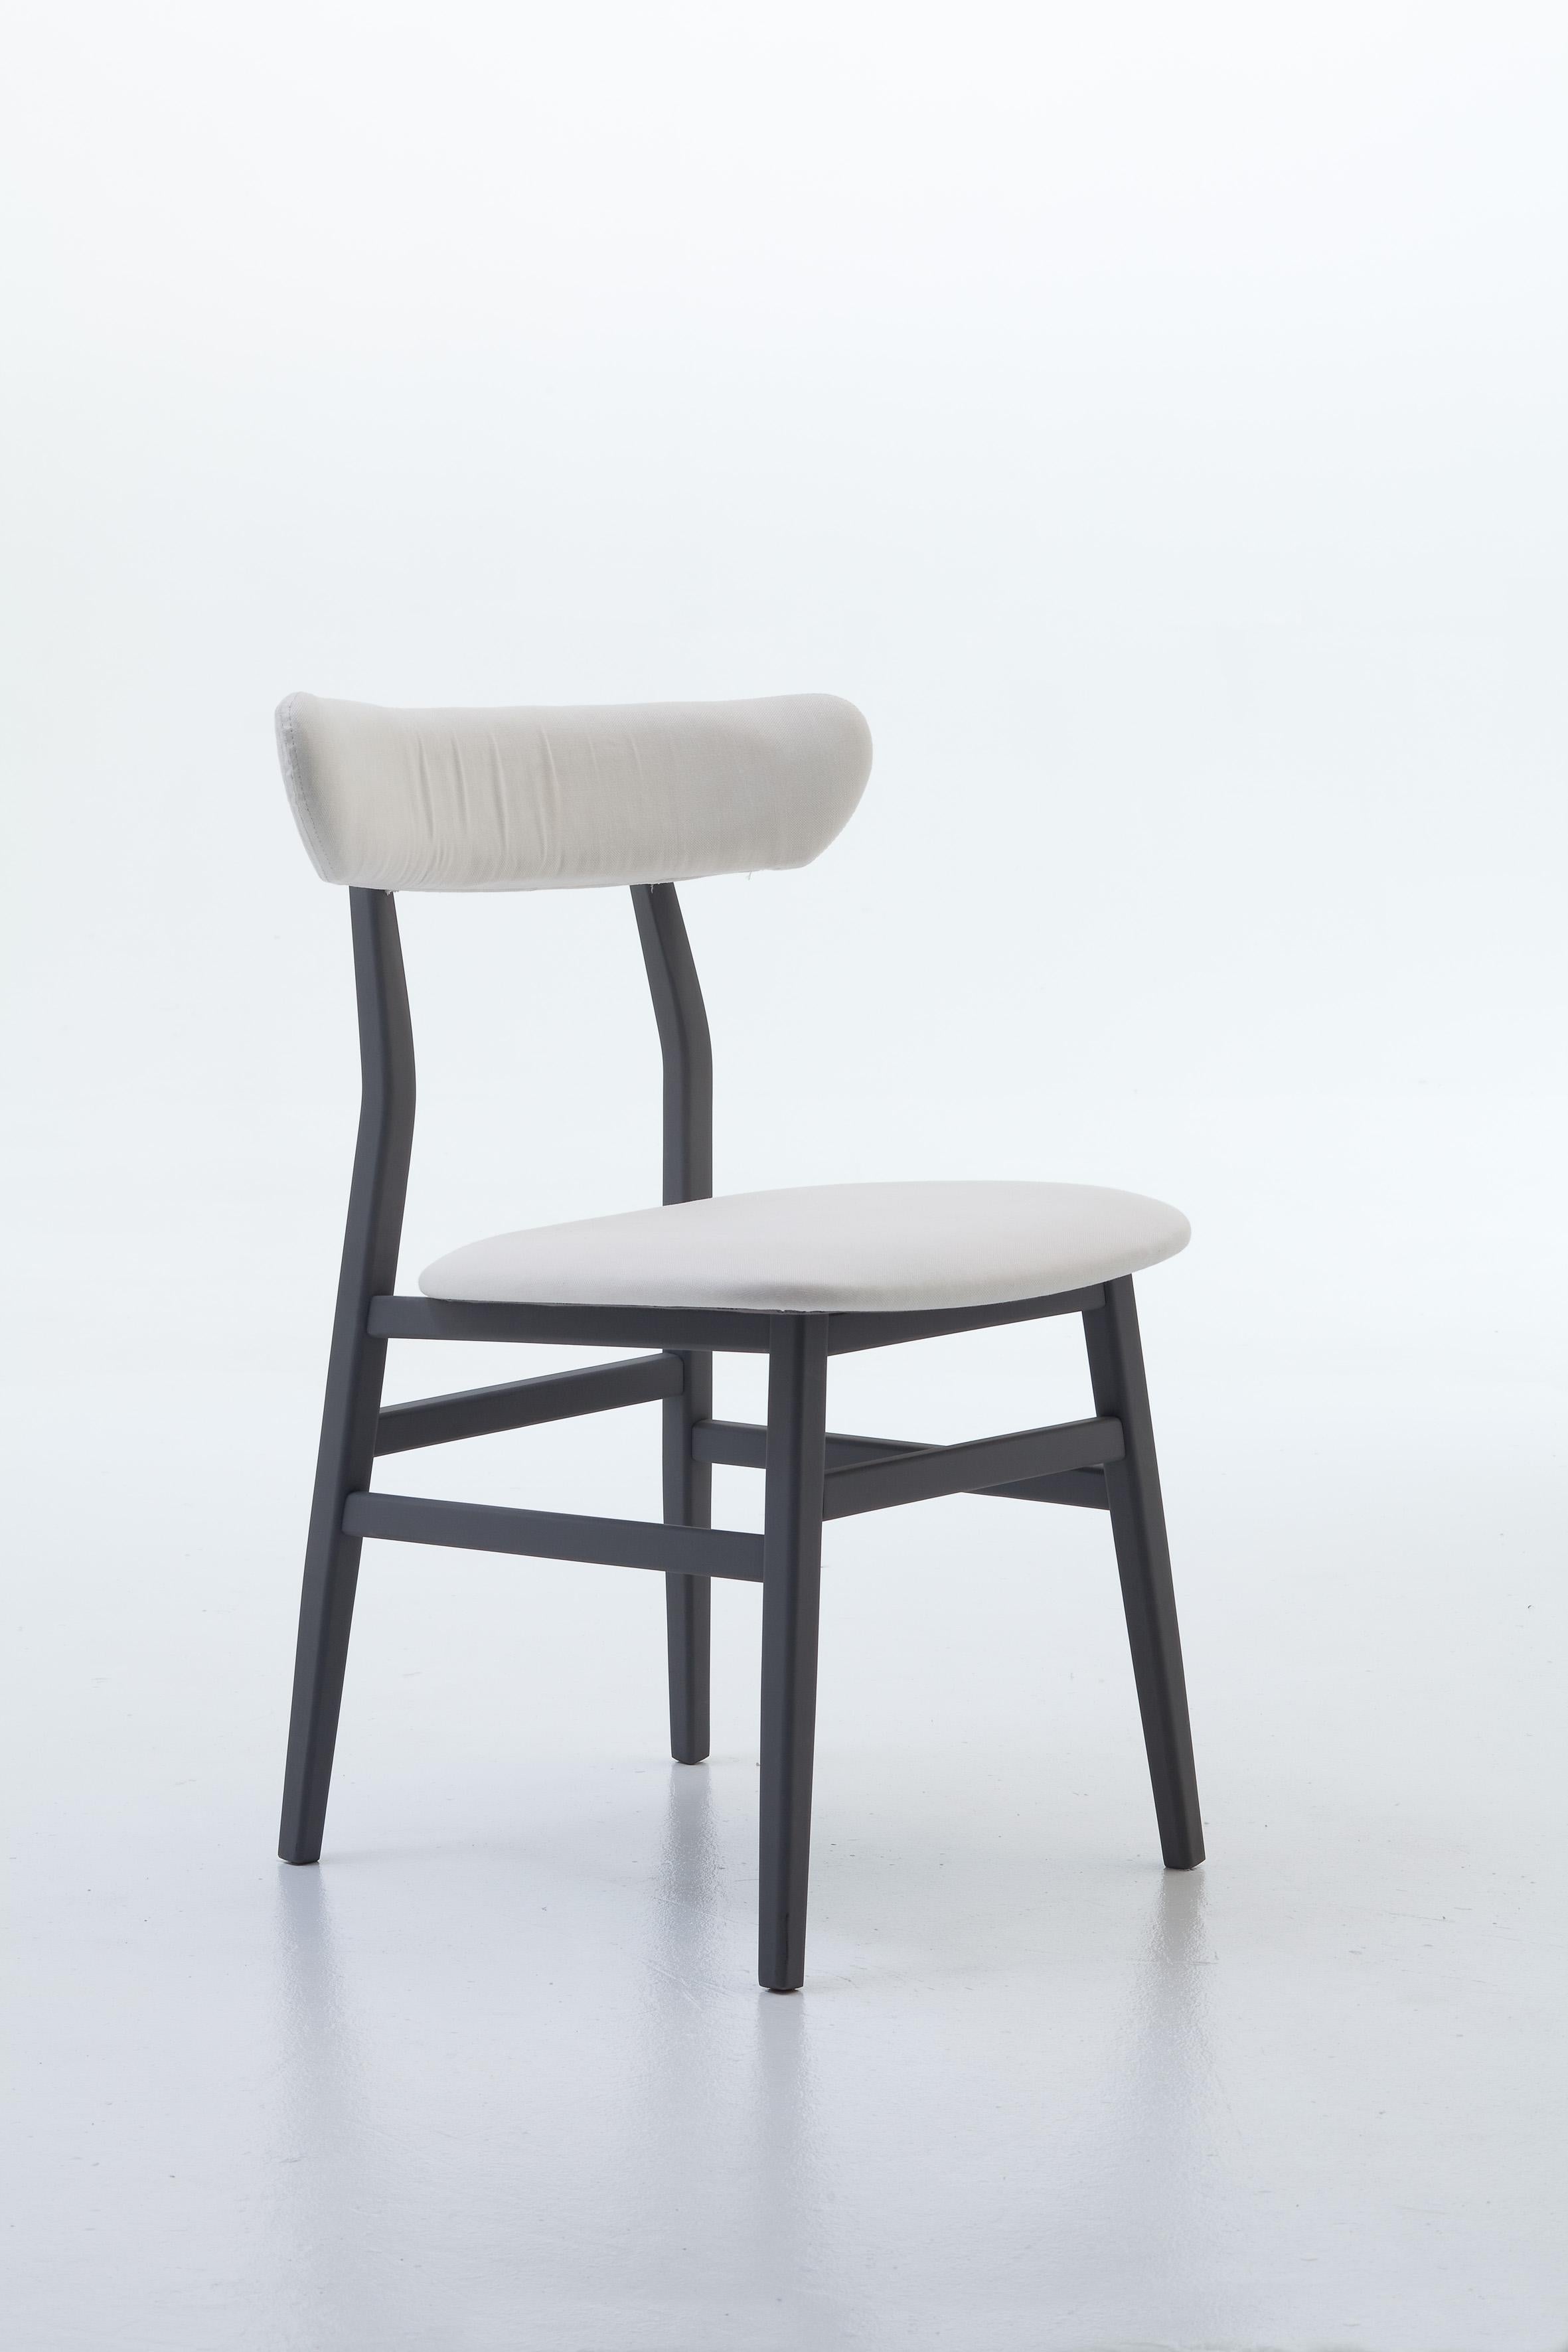 Modern Gervasoni Brick Side Chair in Calcare Upholstery with Black Lacquered Base For Sale